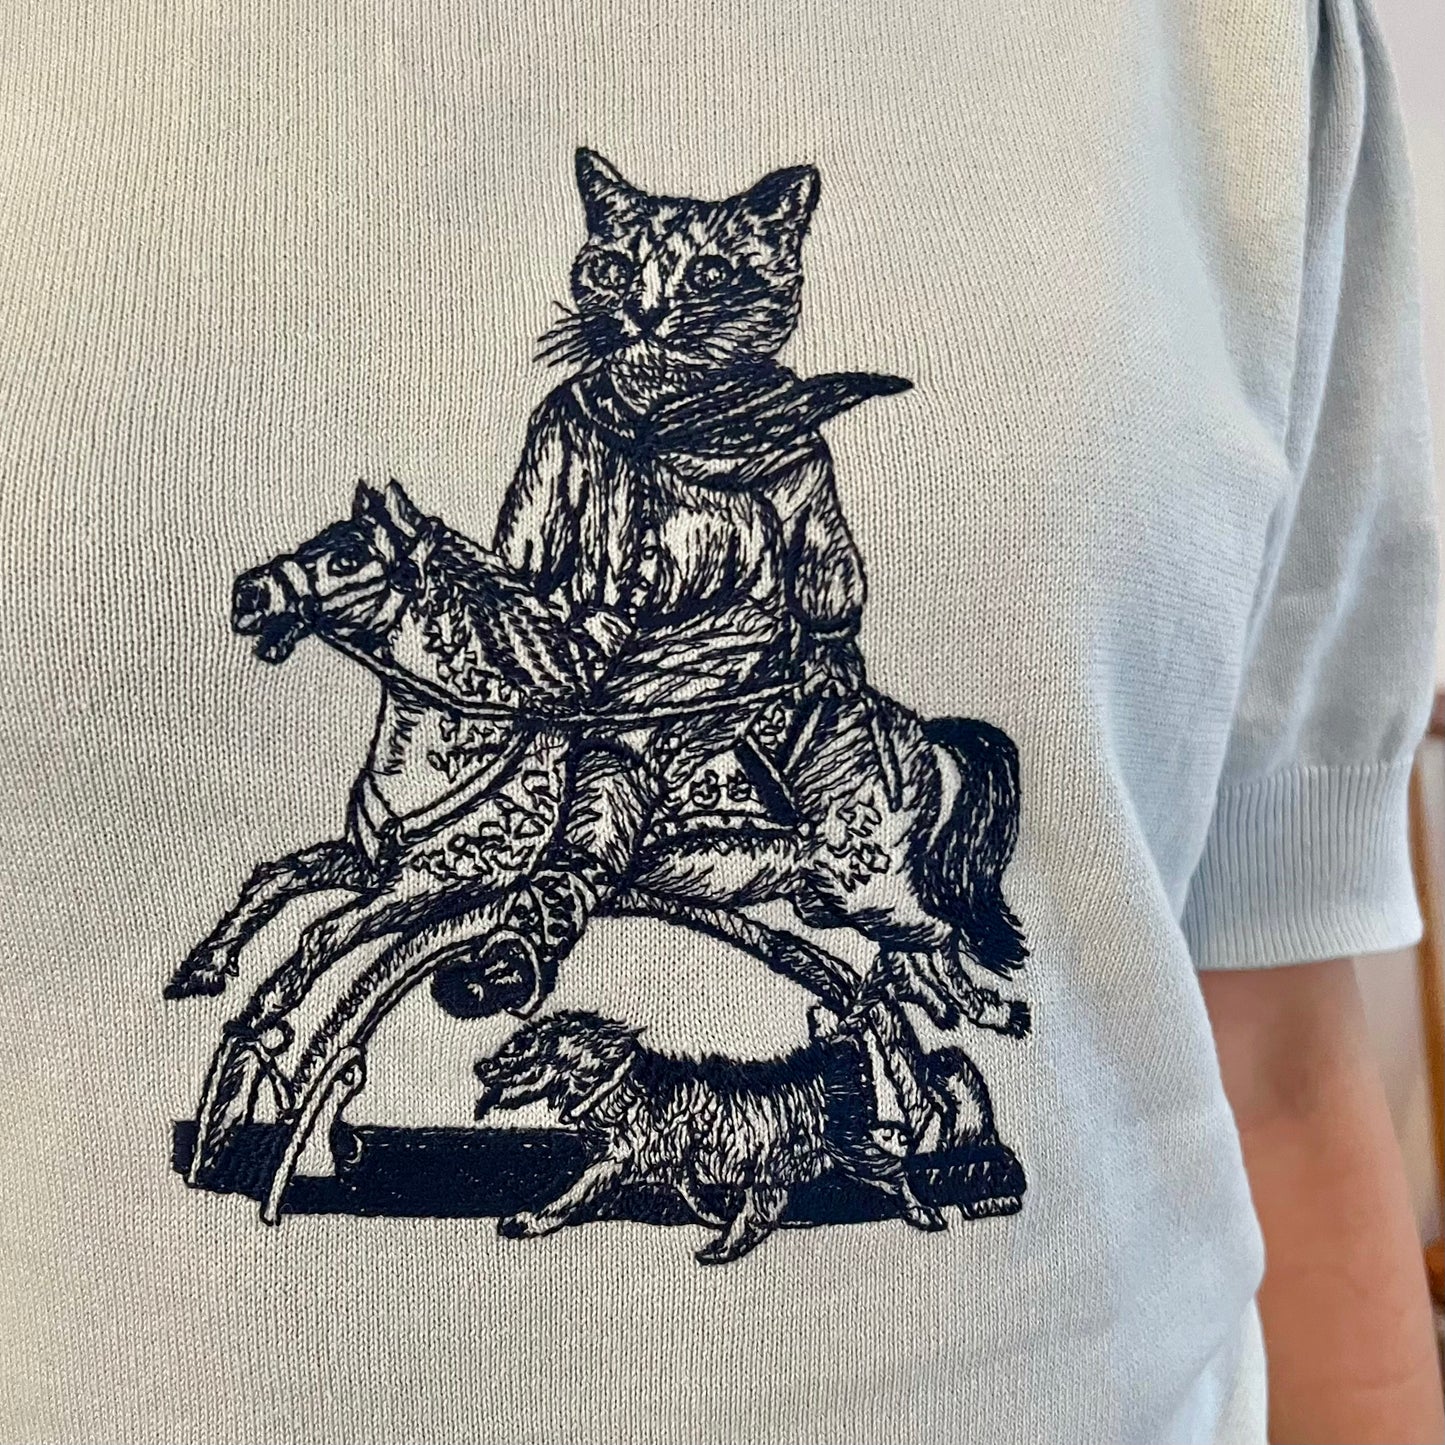 Cat riding wooden horse sweater